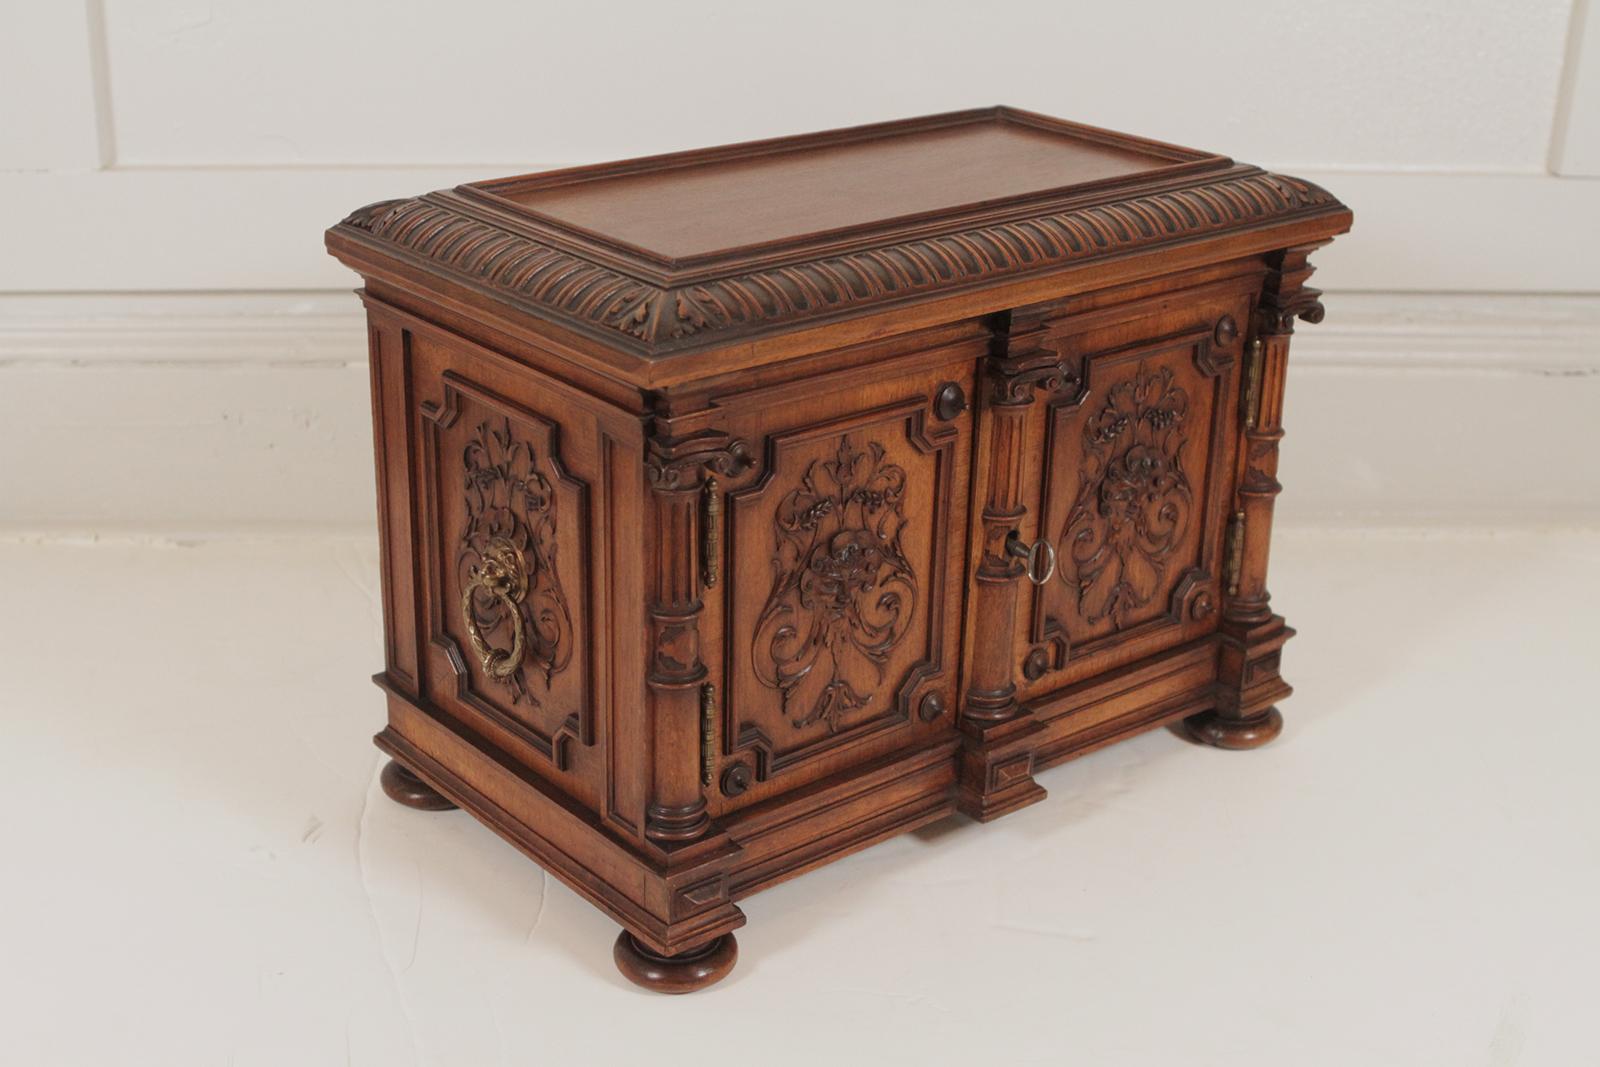 Extraordinary carved walnut two-door diminutive chest. The beautiful hand-carved case with two front doors depicting the lord of the winds on the front and back. The box has finely cast brass ring and lion handles on both sides. The doors open to